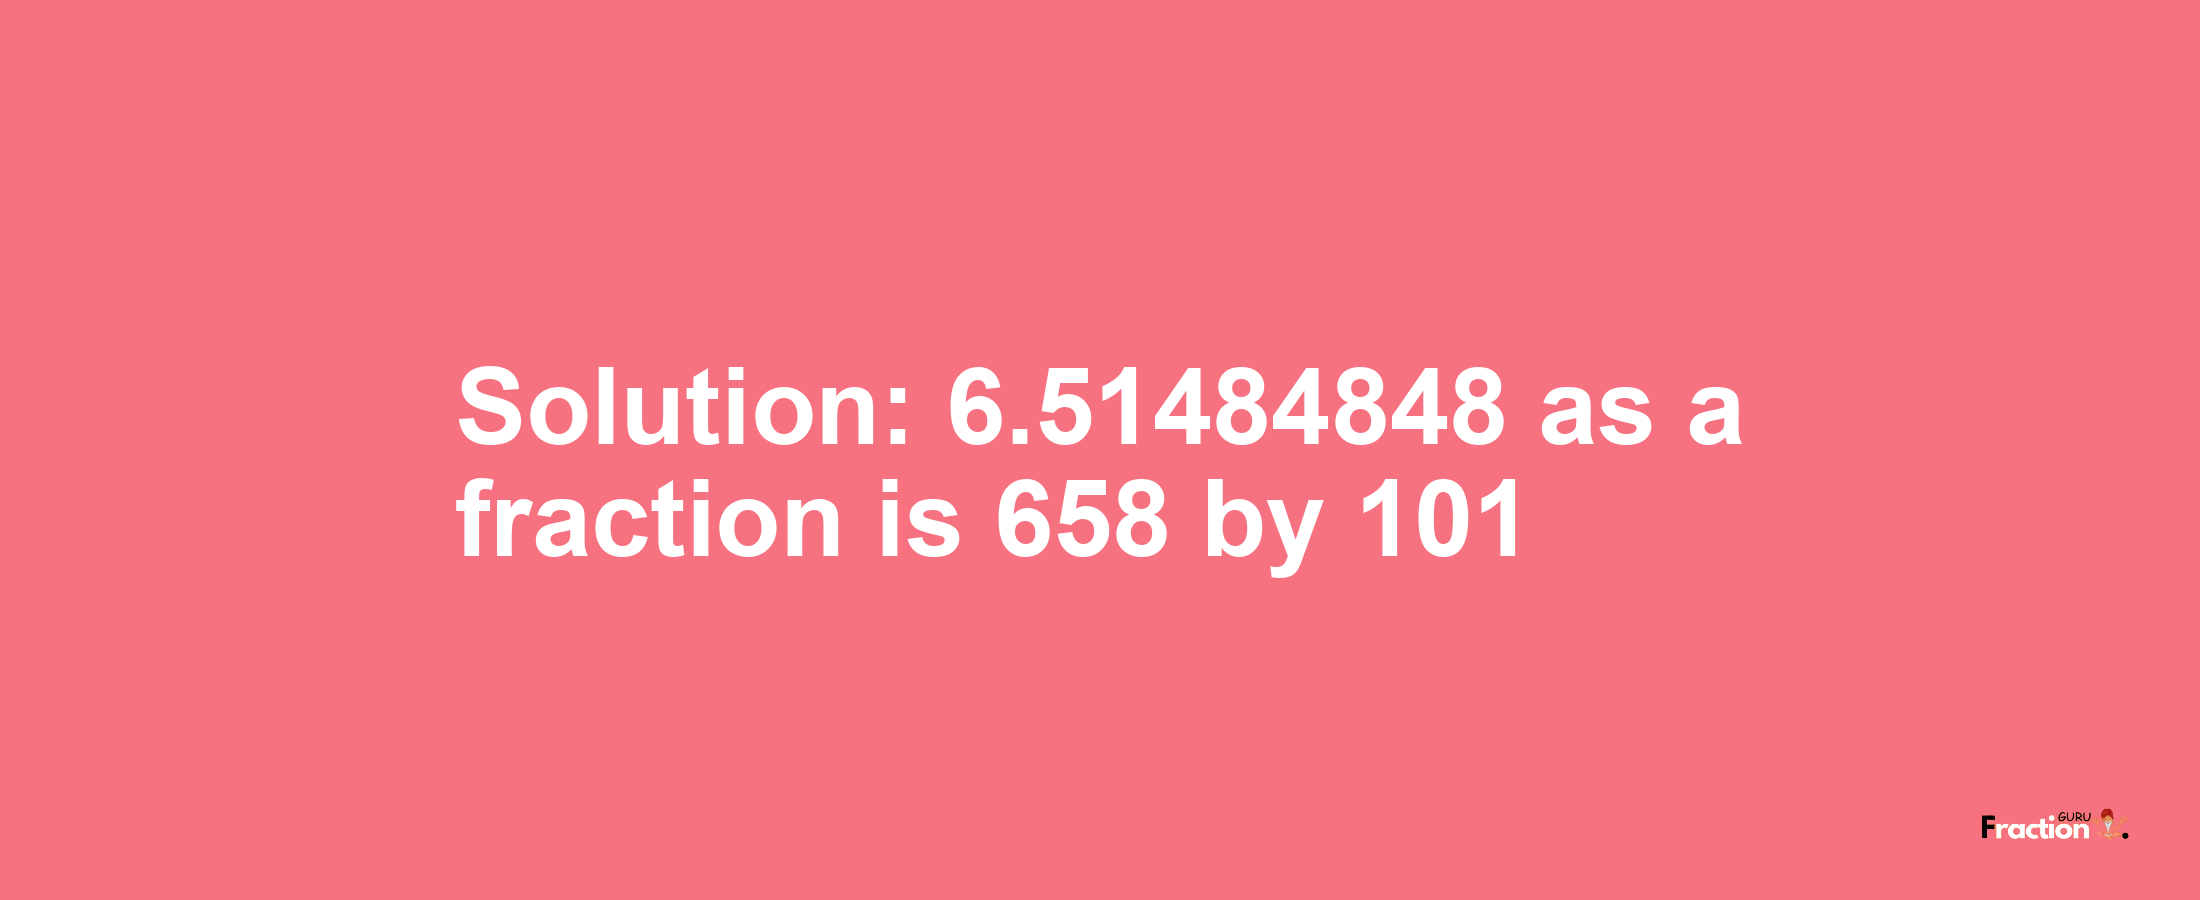 Solution:6.51484848 as a fraction is 658/101